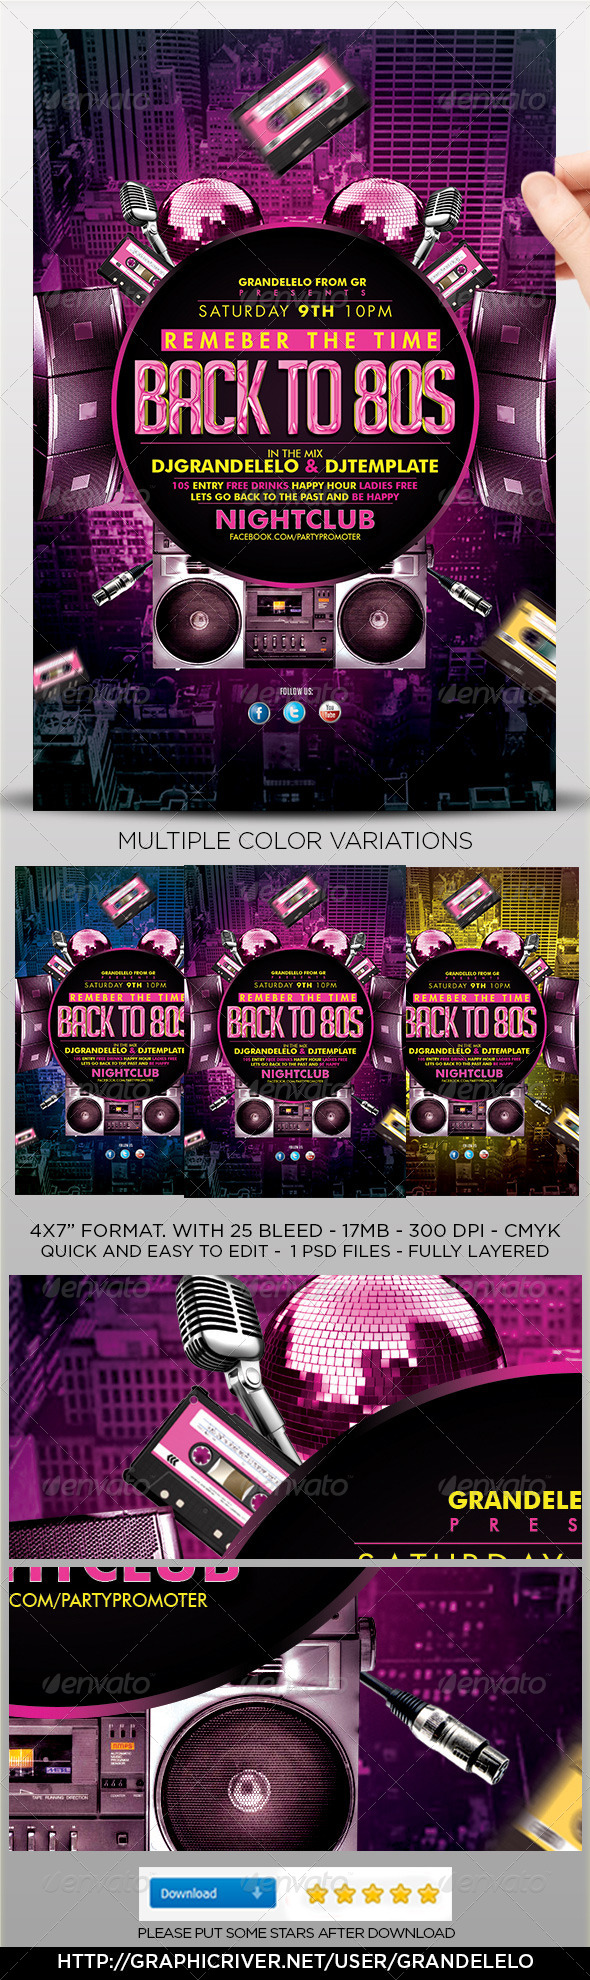 Flash Back 80s Flyer Template